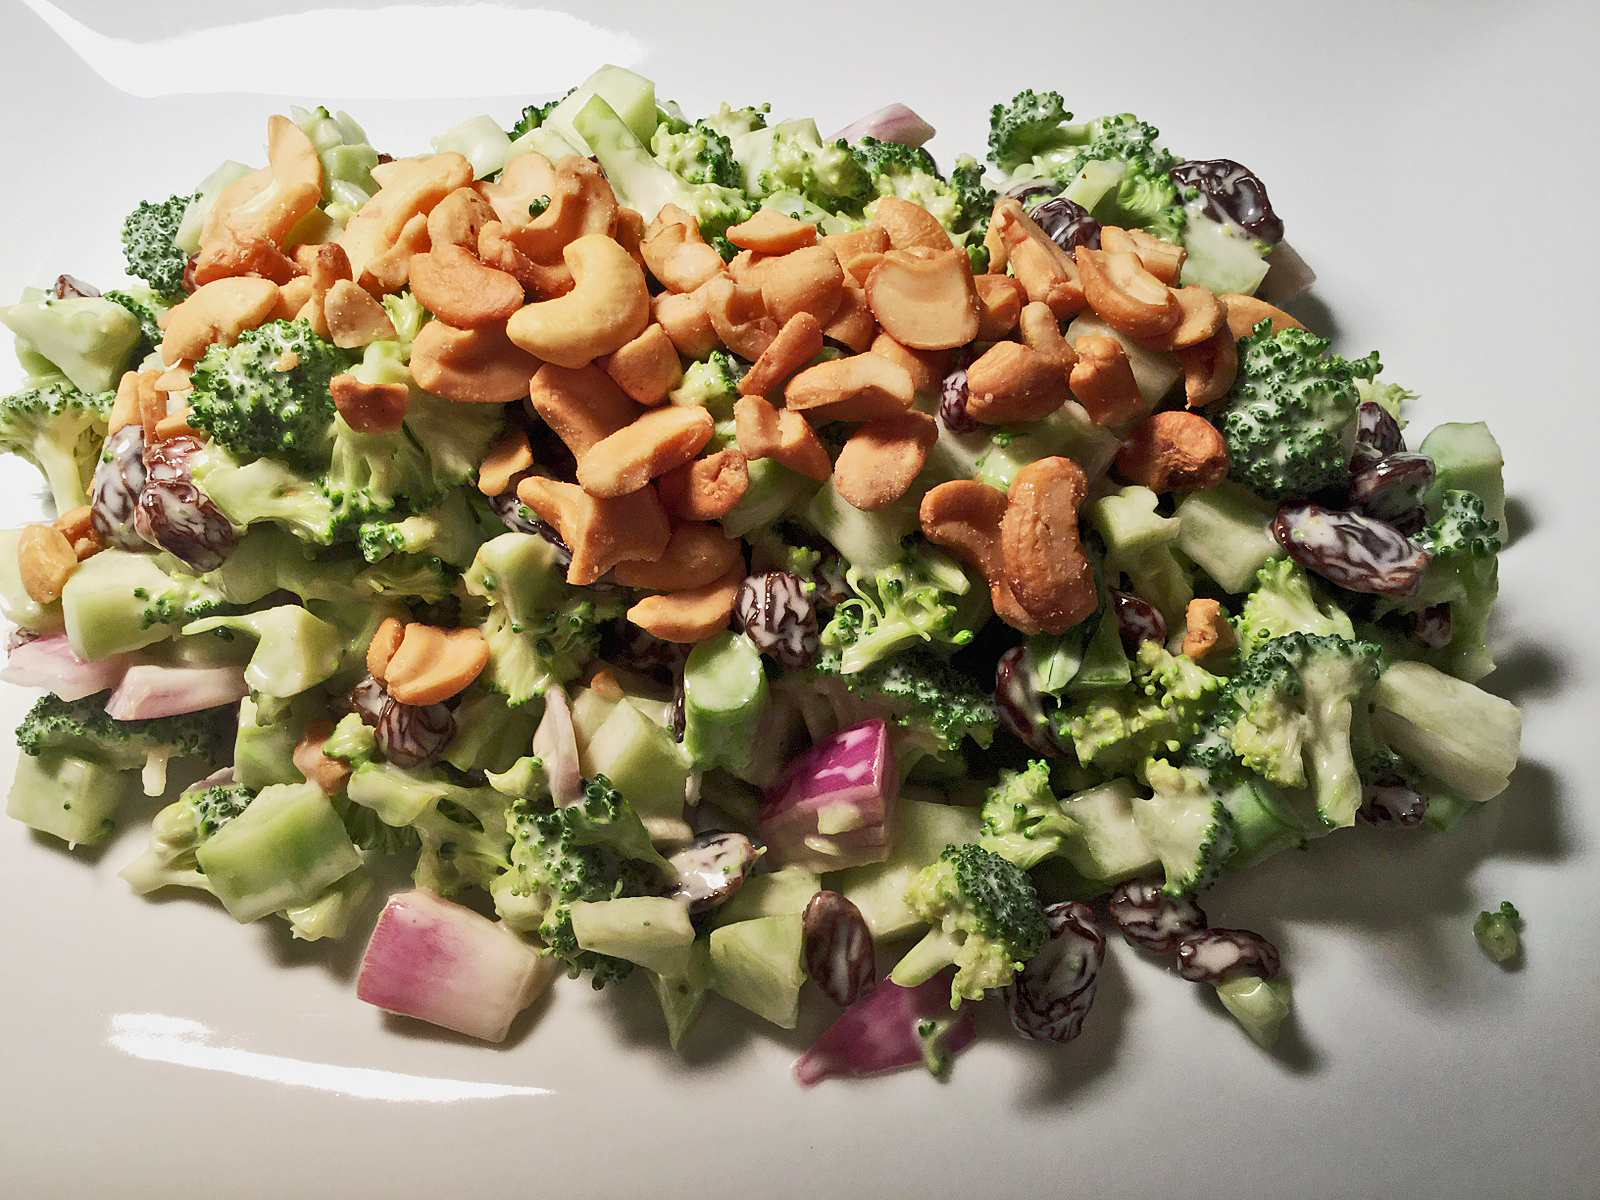 This raw broccoli salad recipe is made with raisins and topped with cashews!